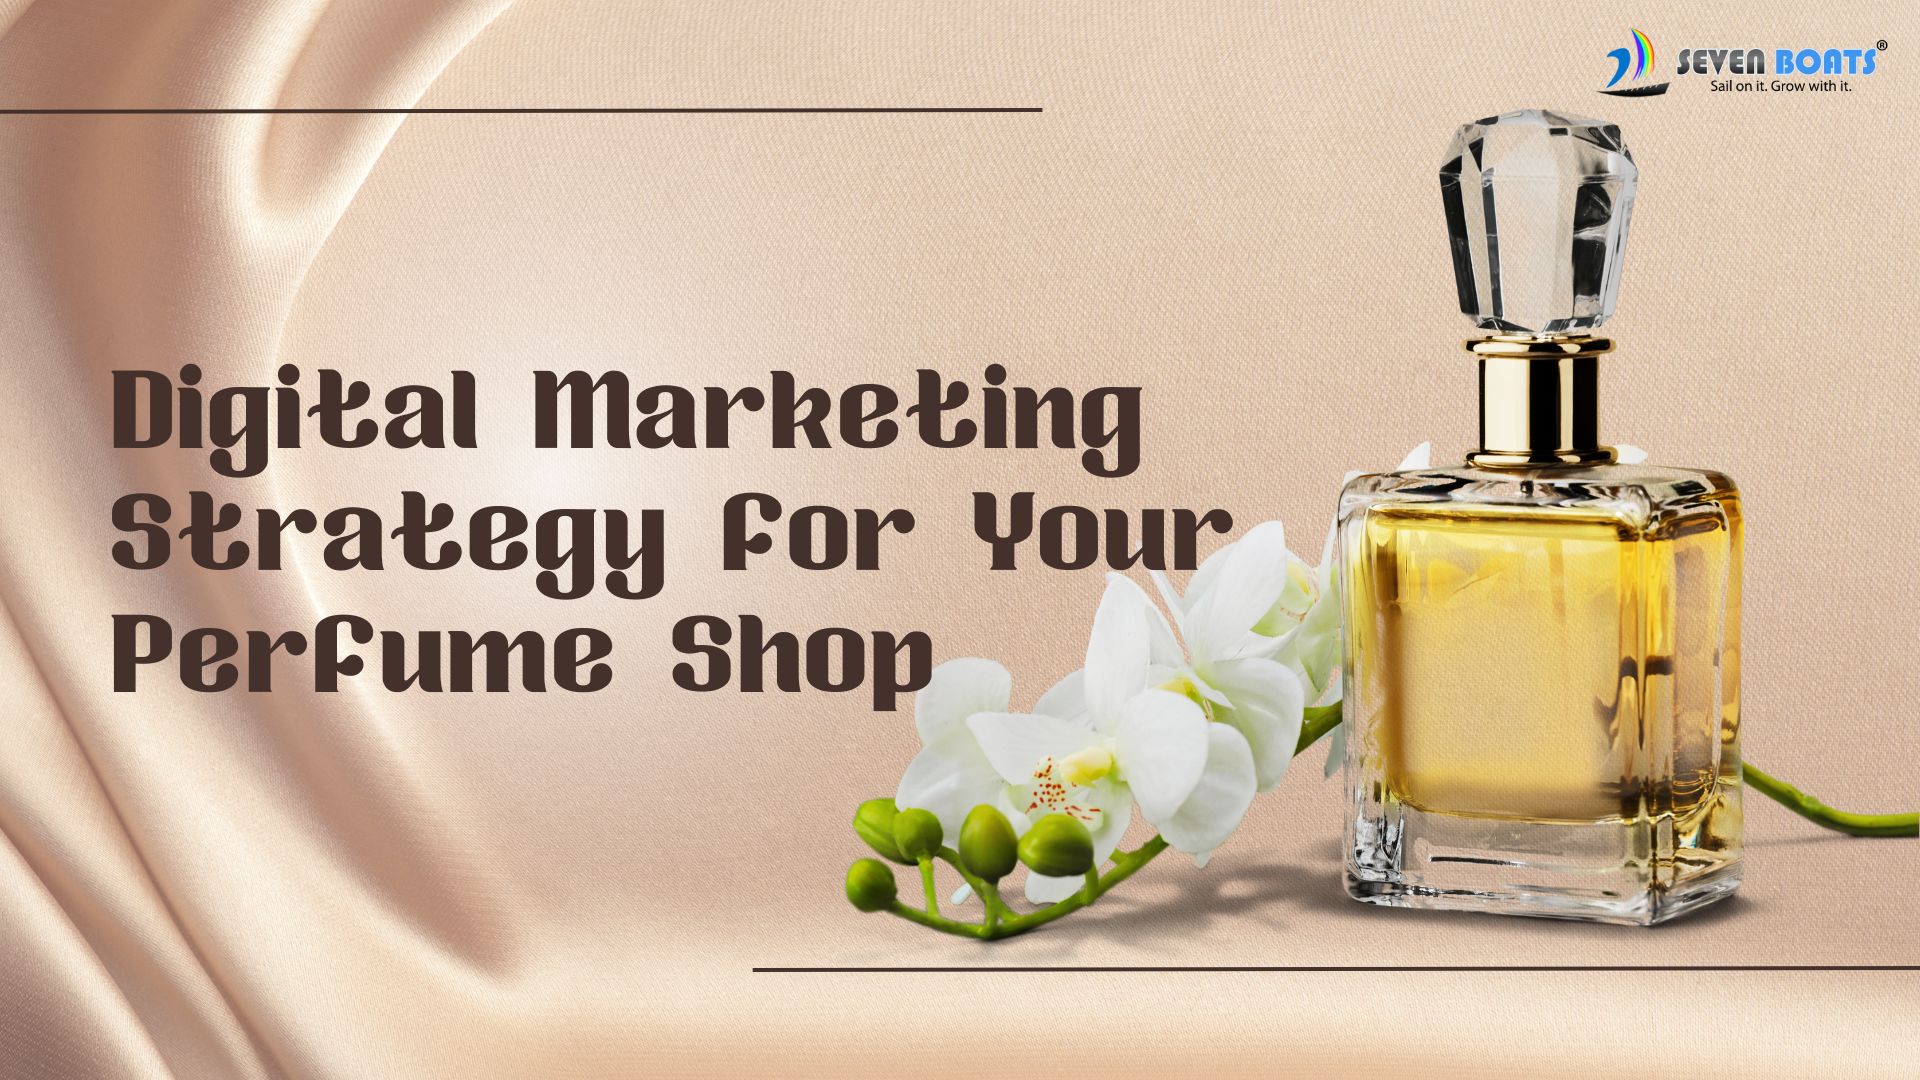 Digital Marketing Strategy for Your Perfume Shop